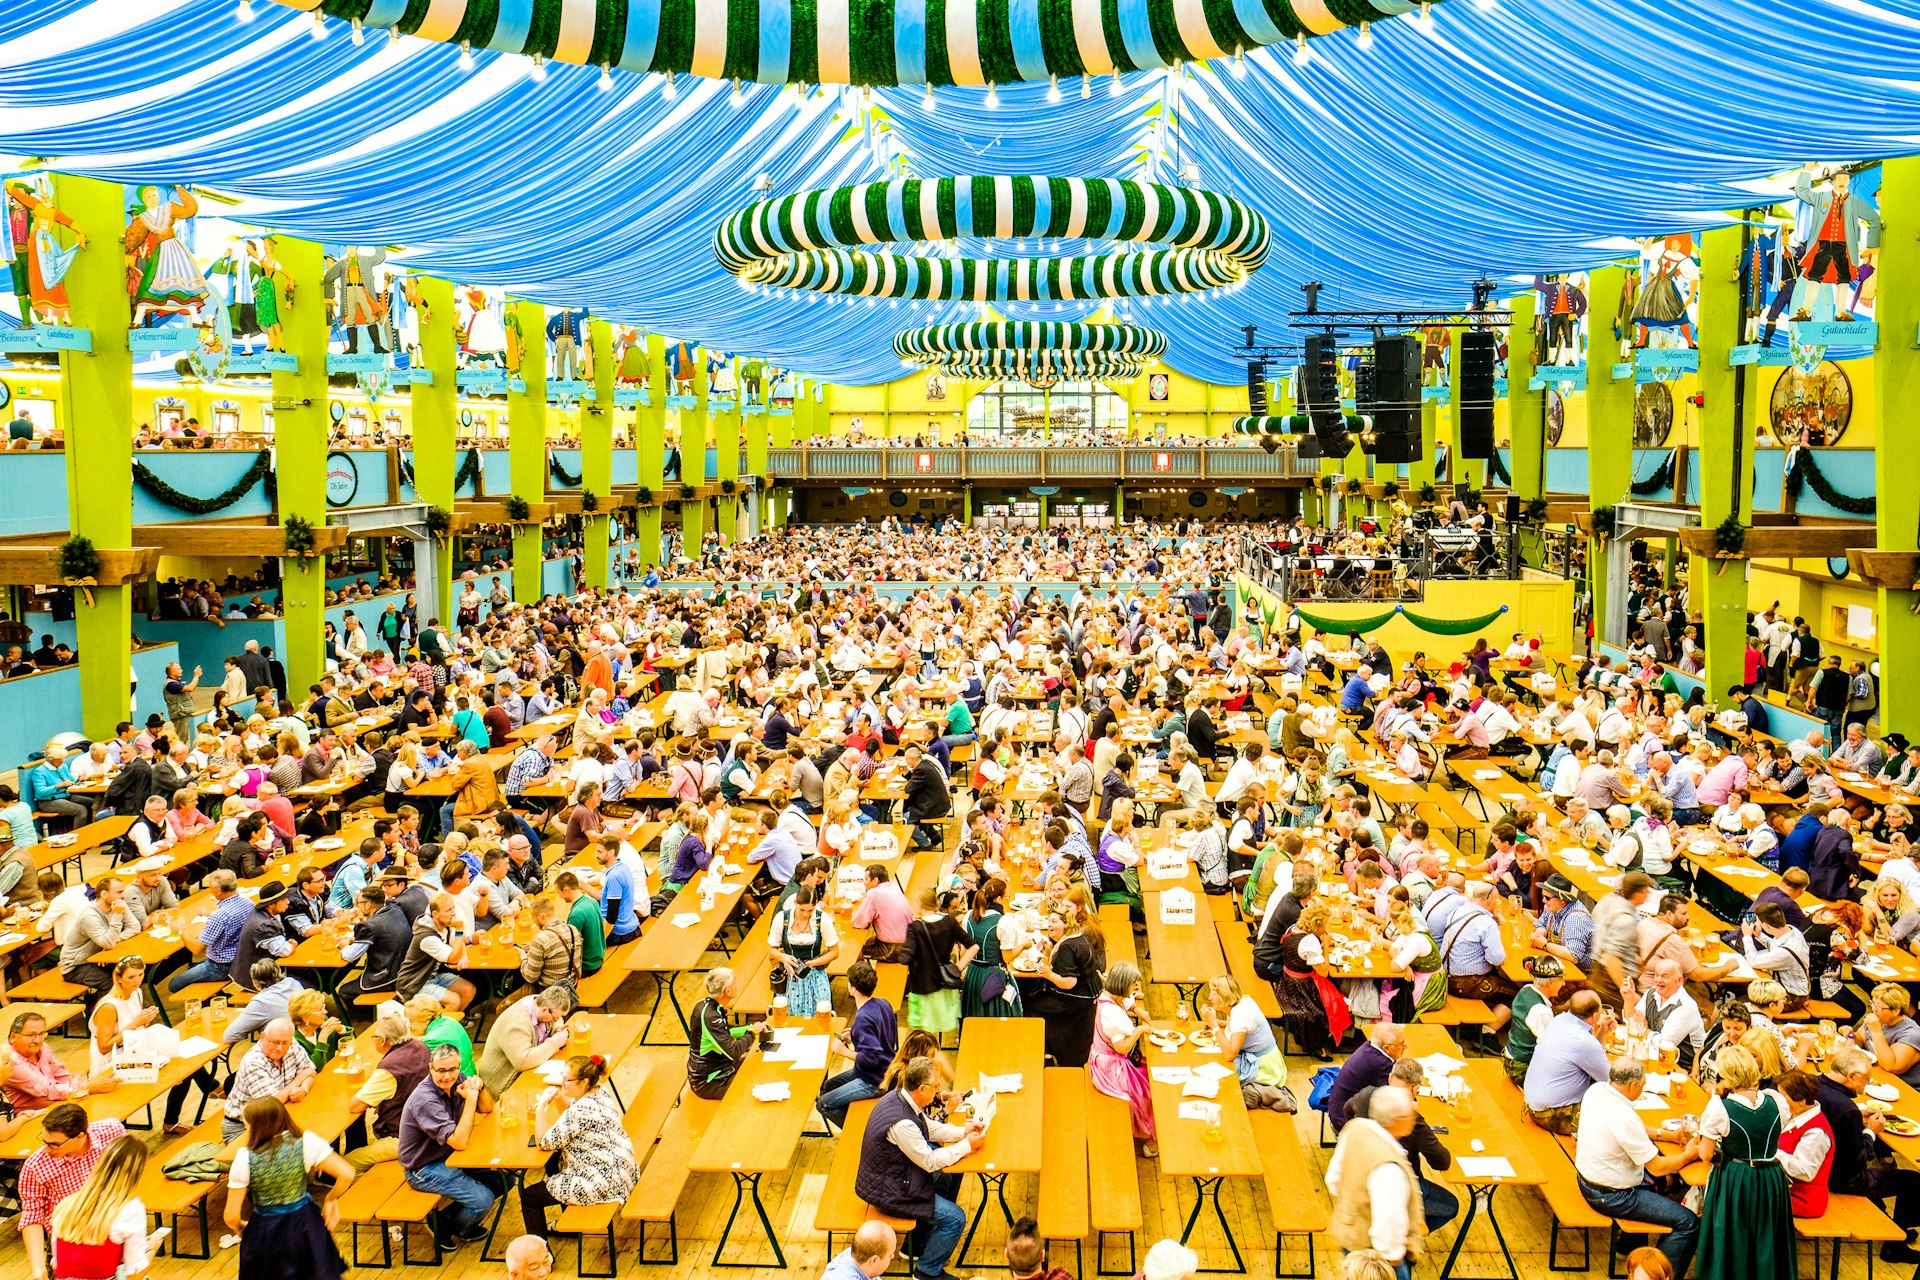 People in the "Spaten"-beer tent at the Oktoberfest in Munich